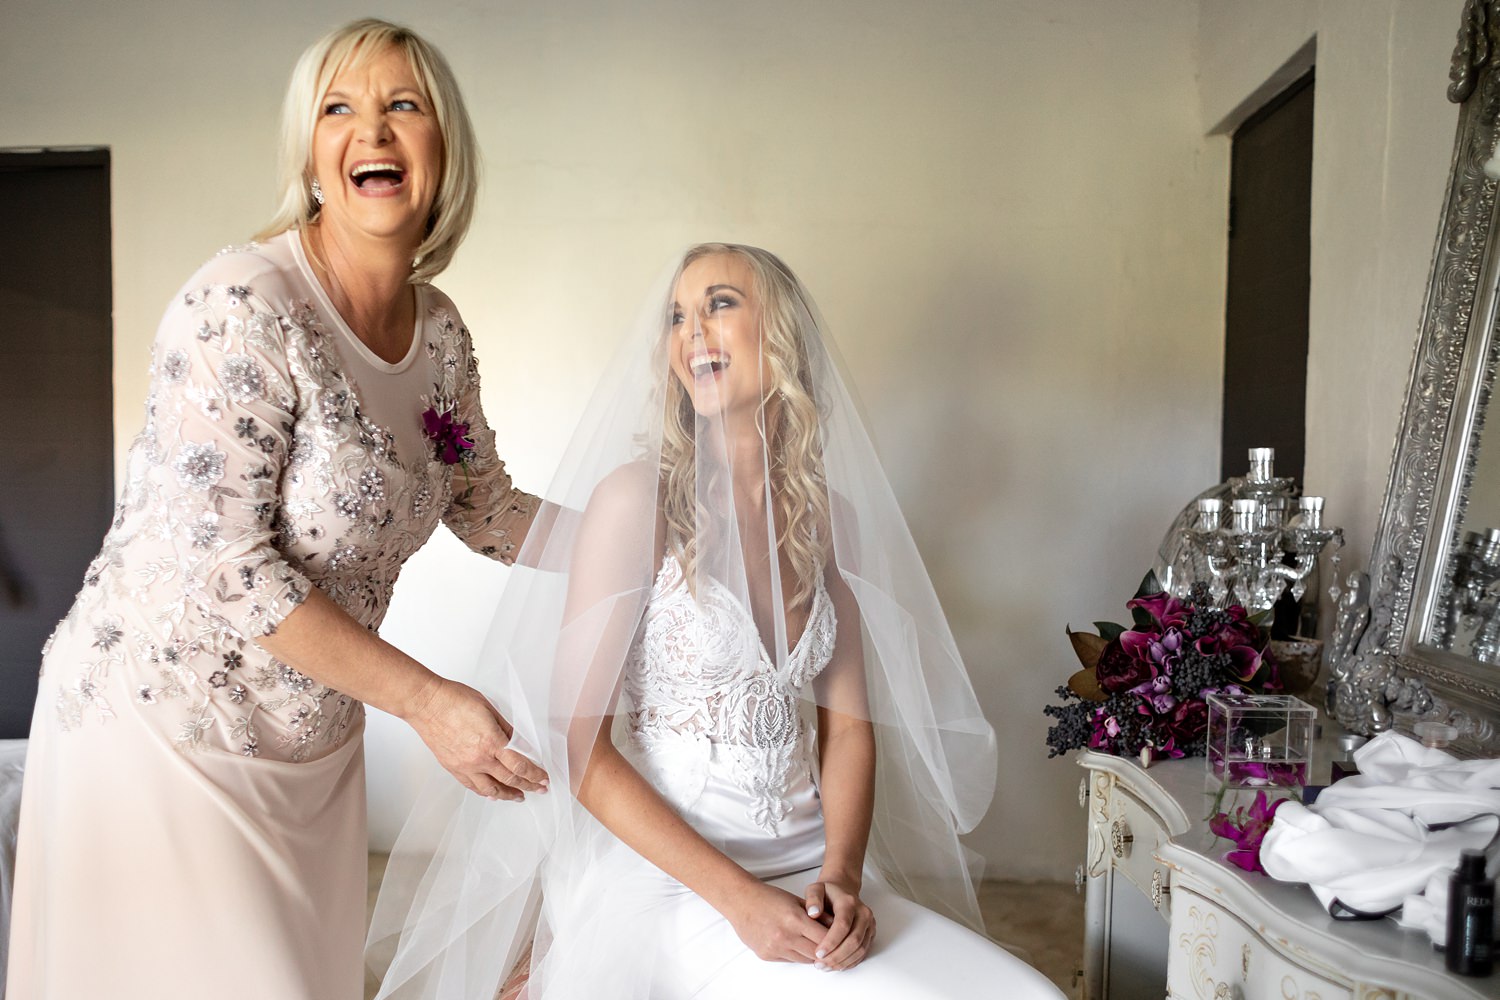 Precious mom and daughter moment at a wedding after she has placed the veil over the bride's head.